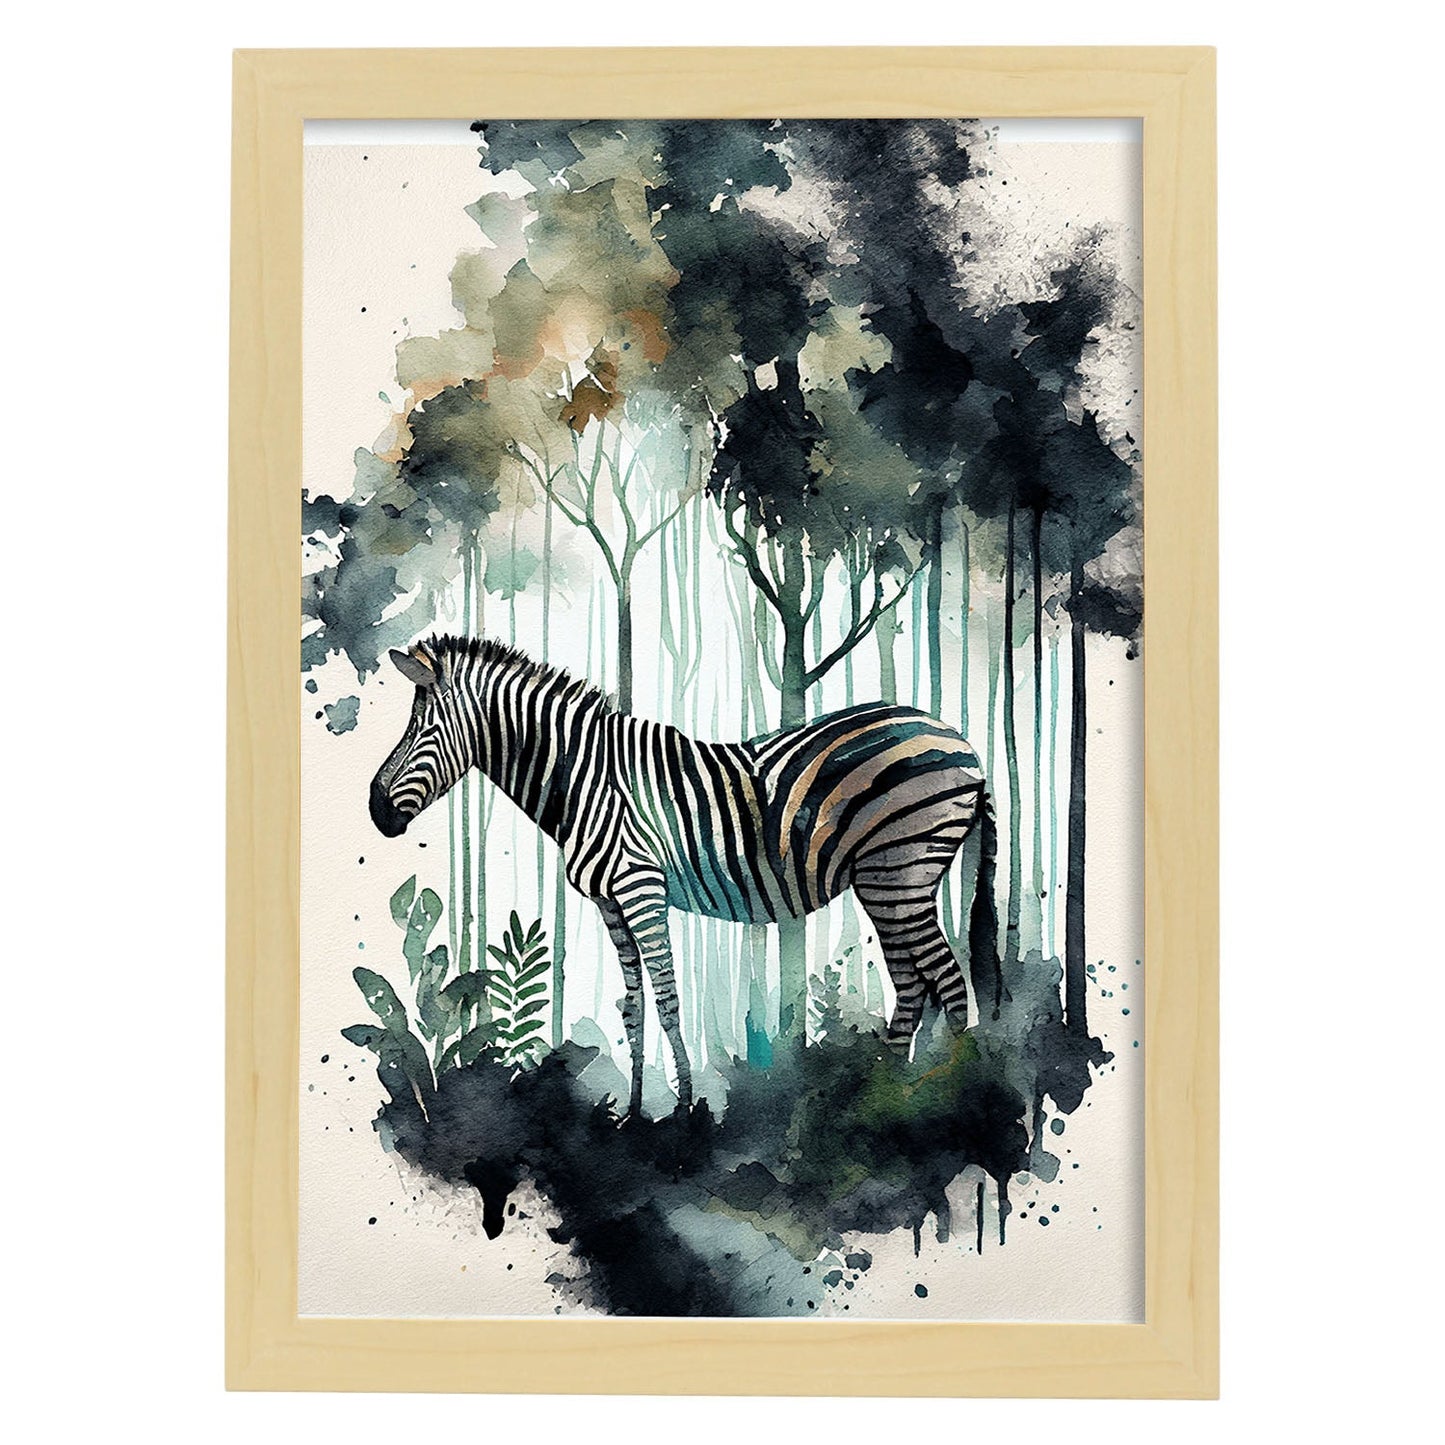 Nacnic Watercolor of Zebra in the forest. Aesthetic Wall Art Prints for Bedroom or Living Room Design.-Artwork-Nacnic-A4-Marco Madera Clara-Nacnic Estudio SL